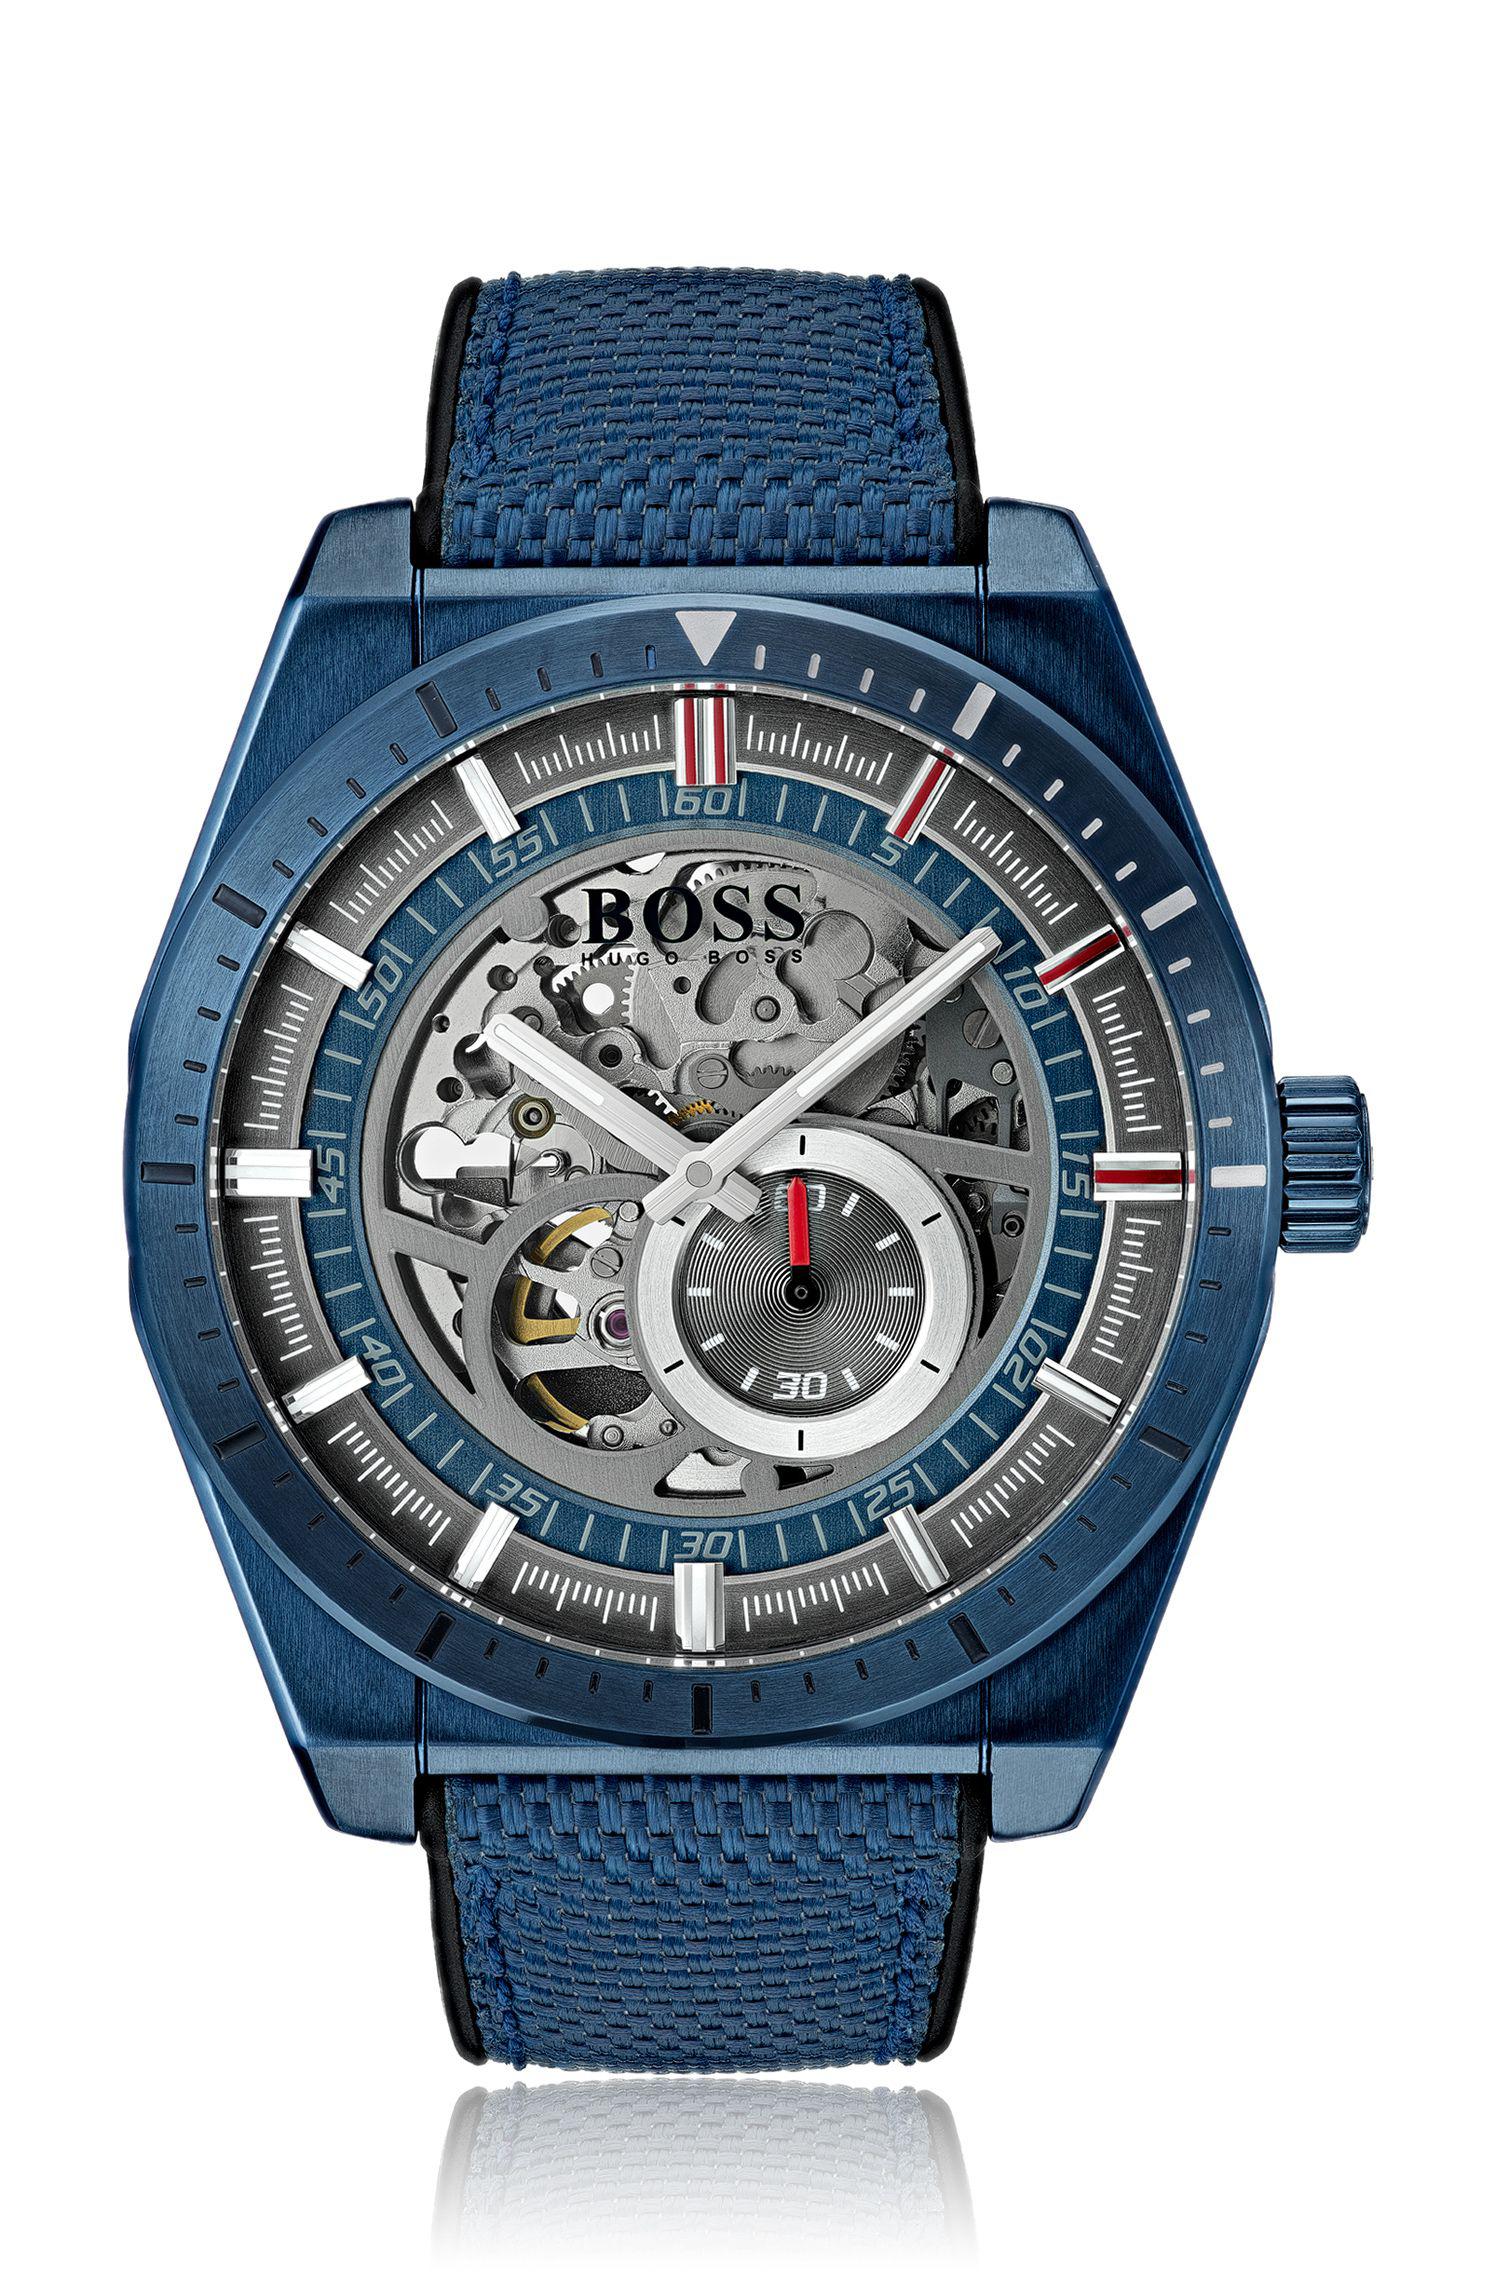 Boss Signature Timepiece Clearance, SAVE 50%.